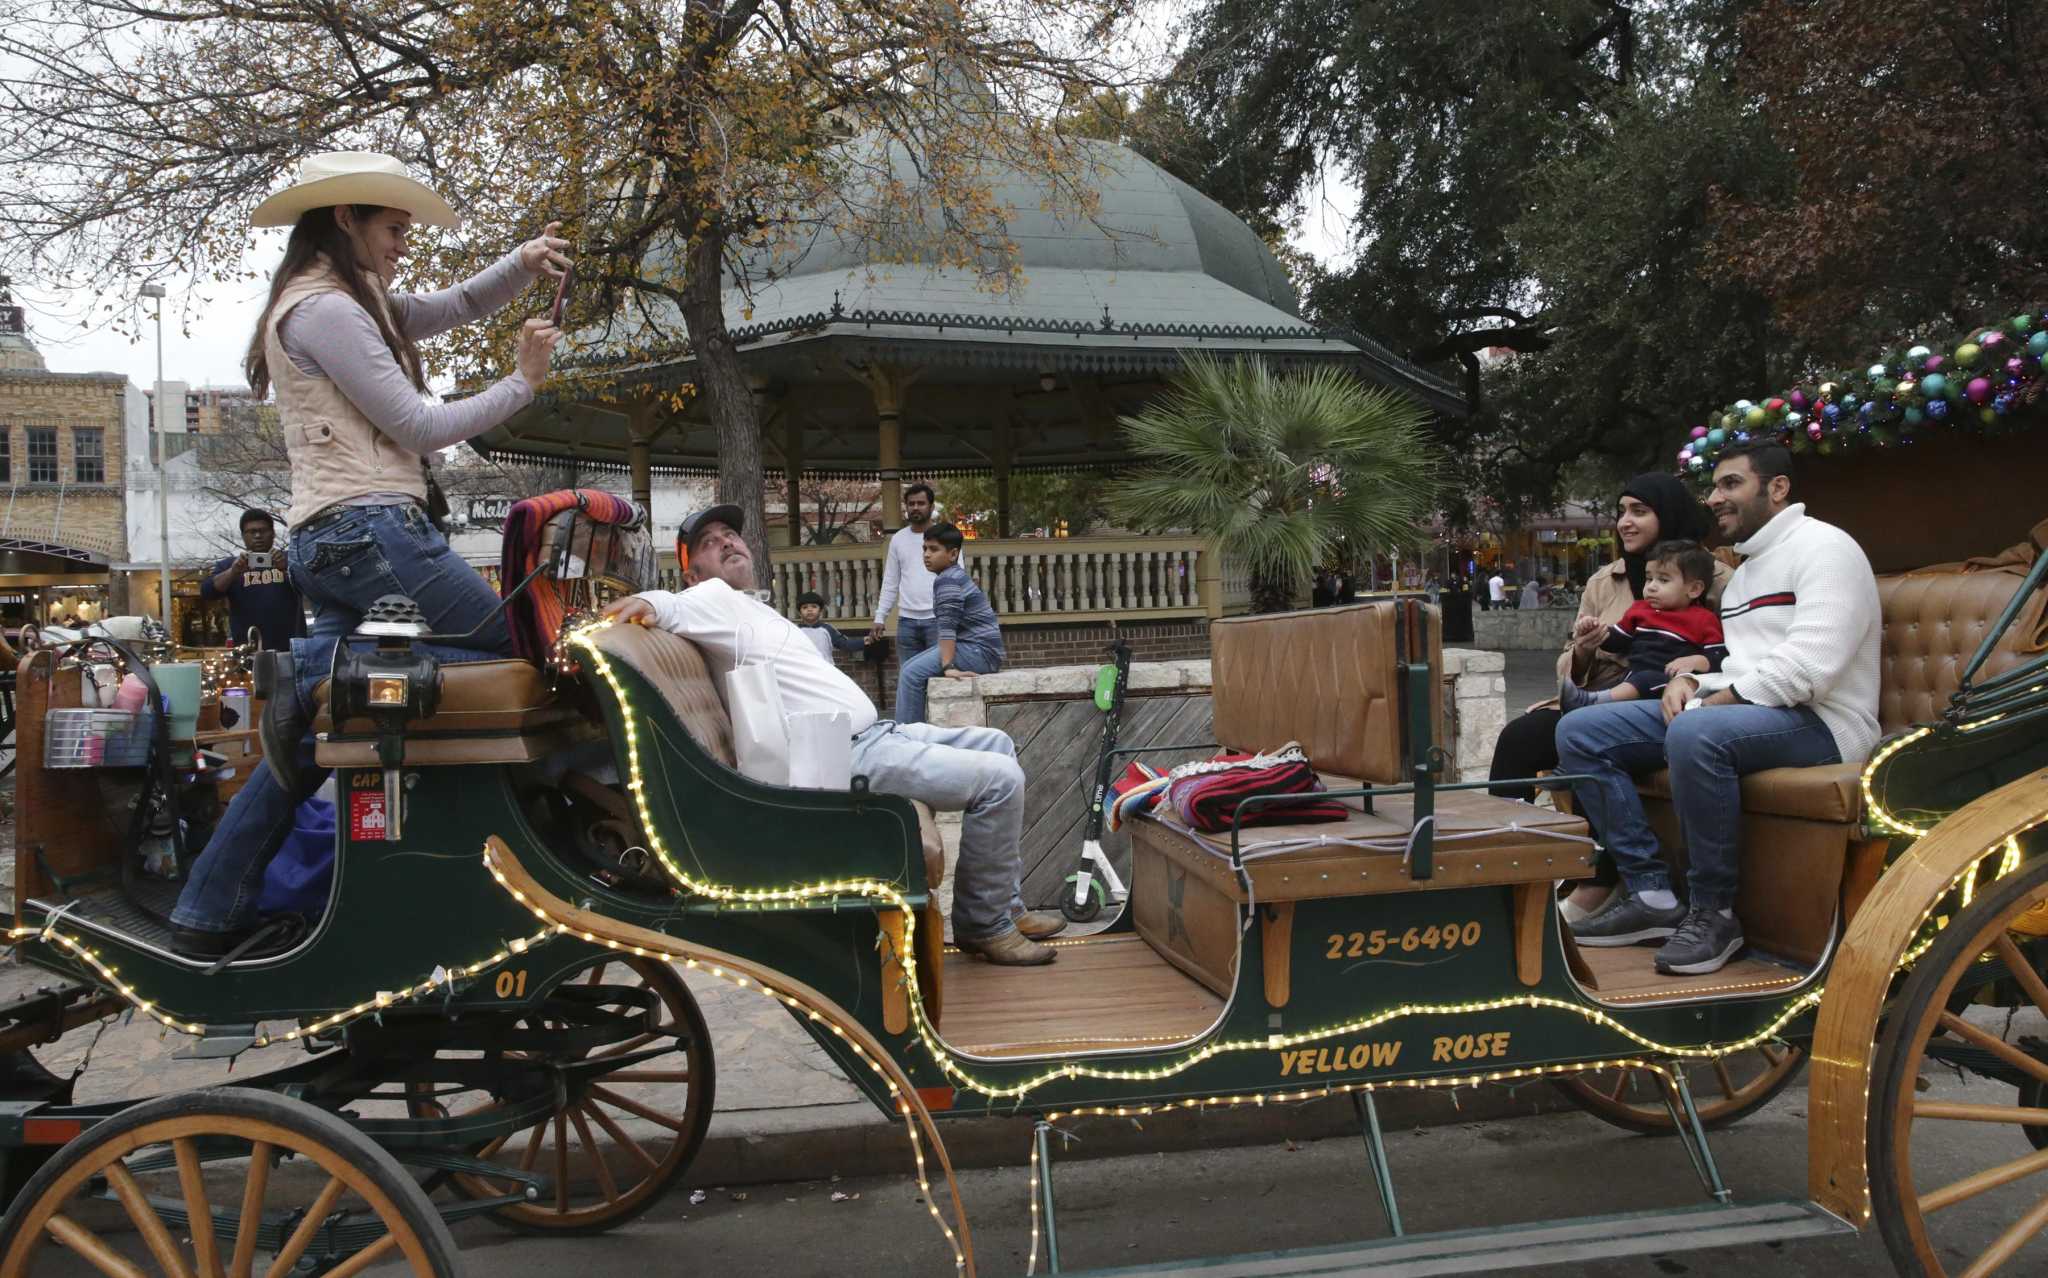 San Antonio must end antiquated tradition of horse-drawn carriages